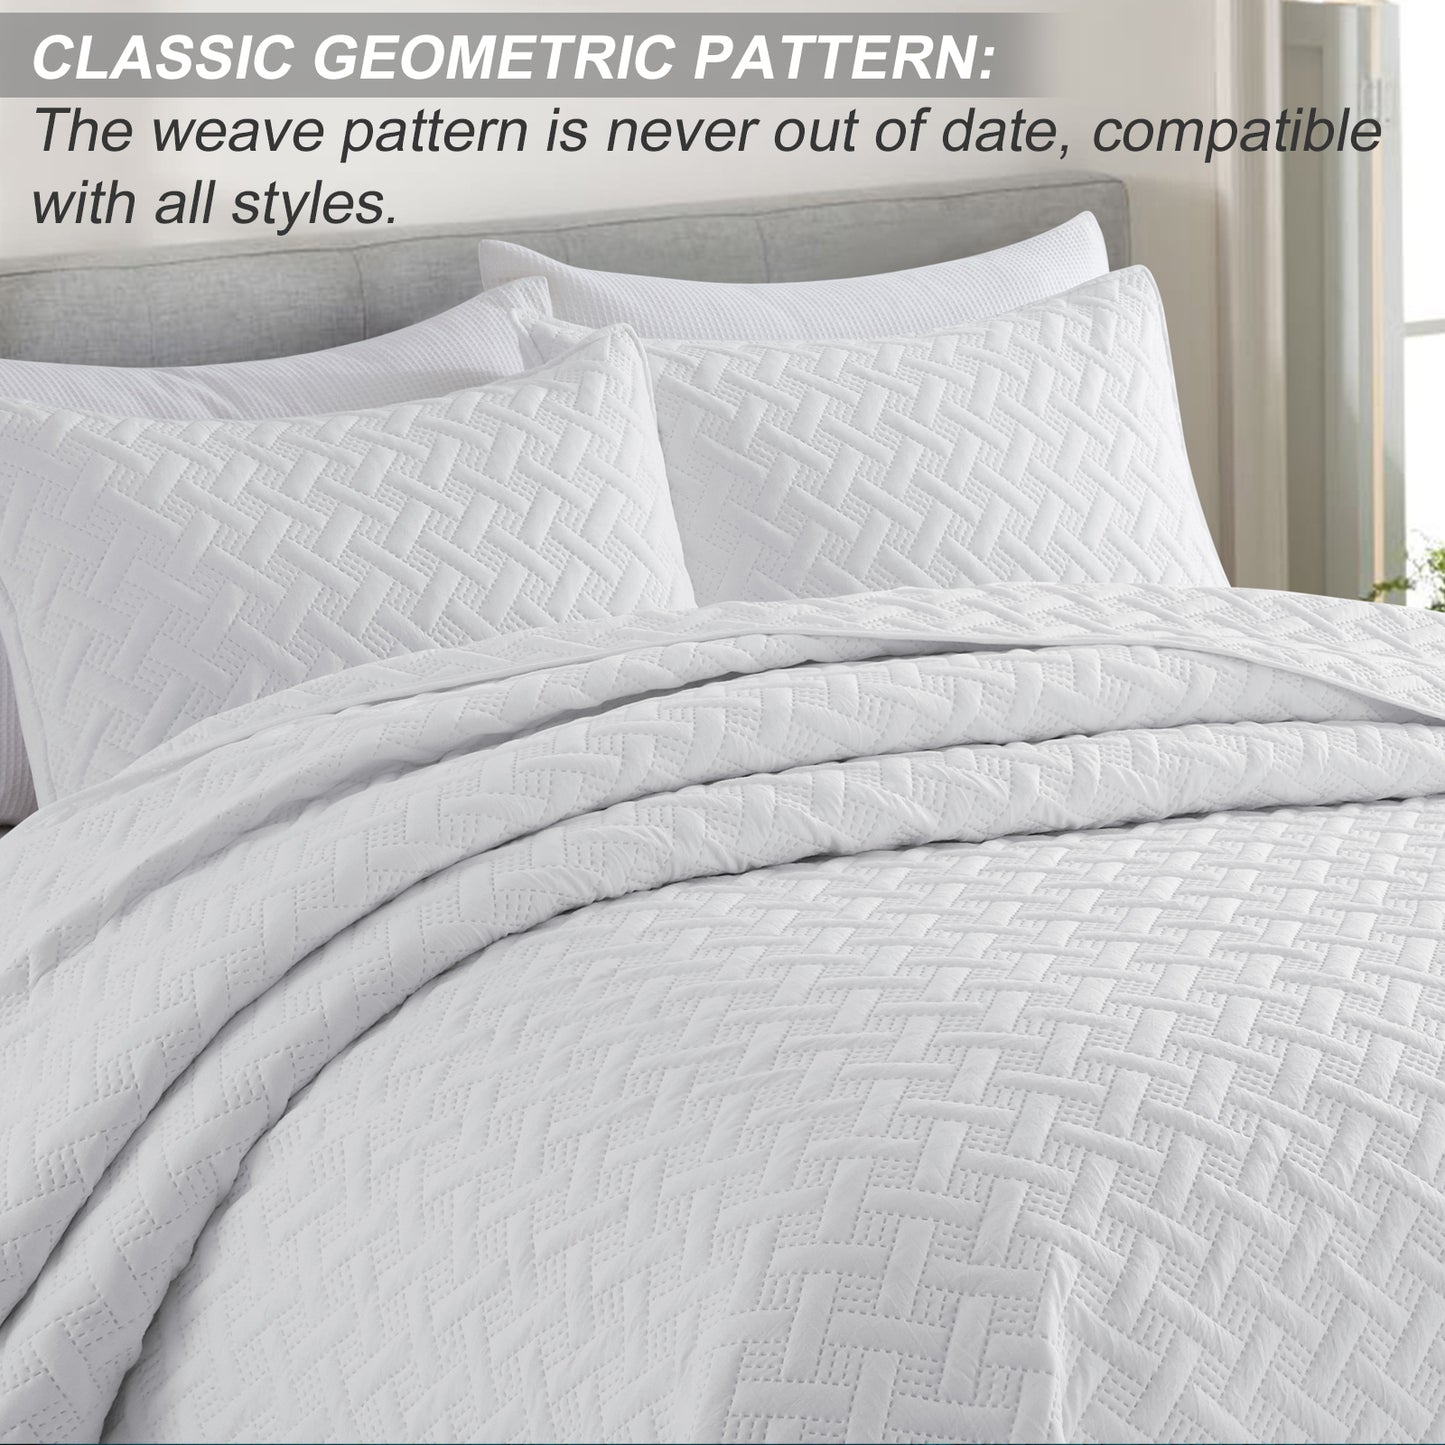 Exclusivo Mezcla 2-Piece White Twin Size Quilt Set, Weave Pattern Ultrasonic Lightweight and Soft Quilts/Bedspreads/Coverlets/Bedding Set (1 Quilt, 1 Pillow Sham) for All Seasons